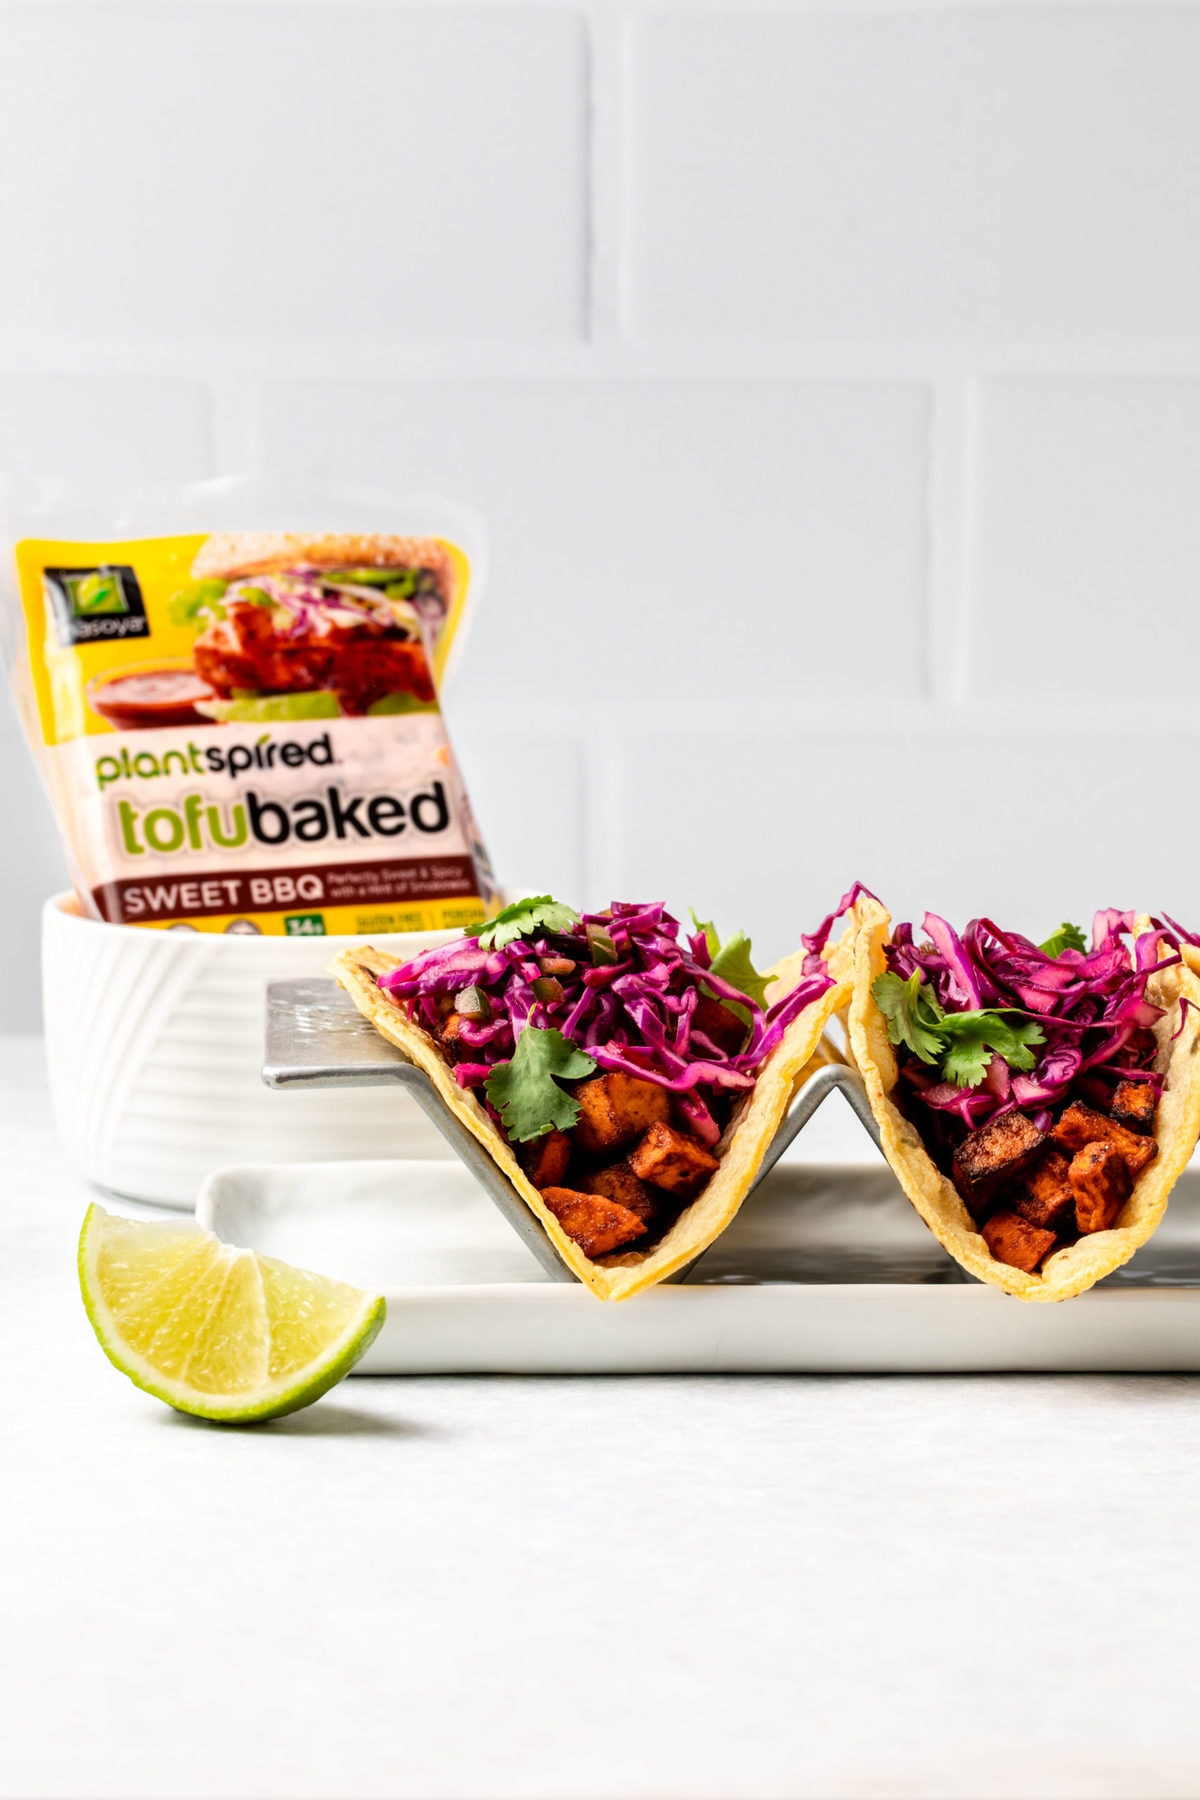 Two tacos topped with red cabbage slaw with a package of Nasoya's Plantspired Sweet BBQ TofuBaked in the background